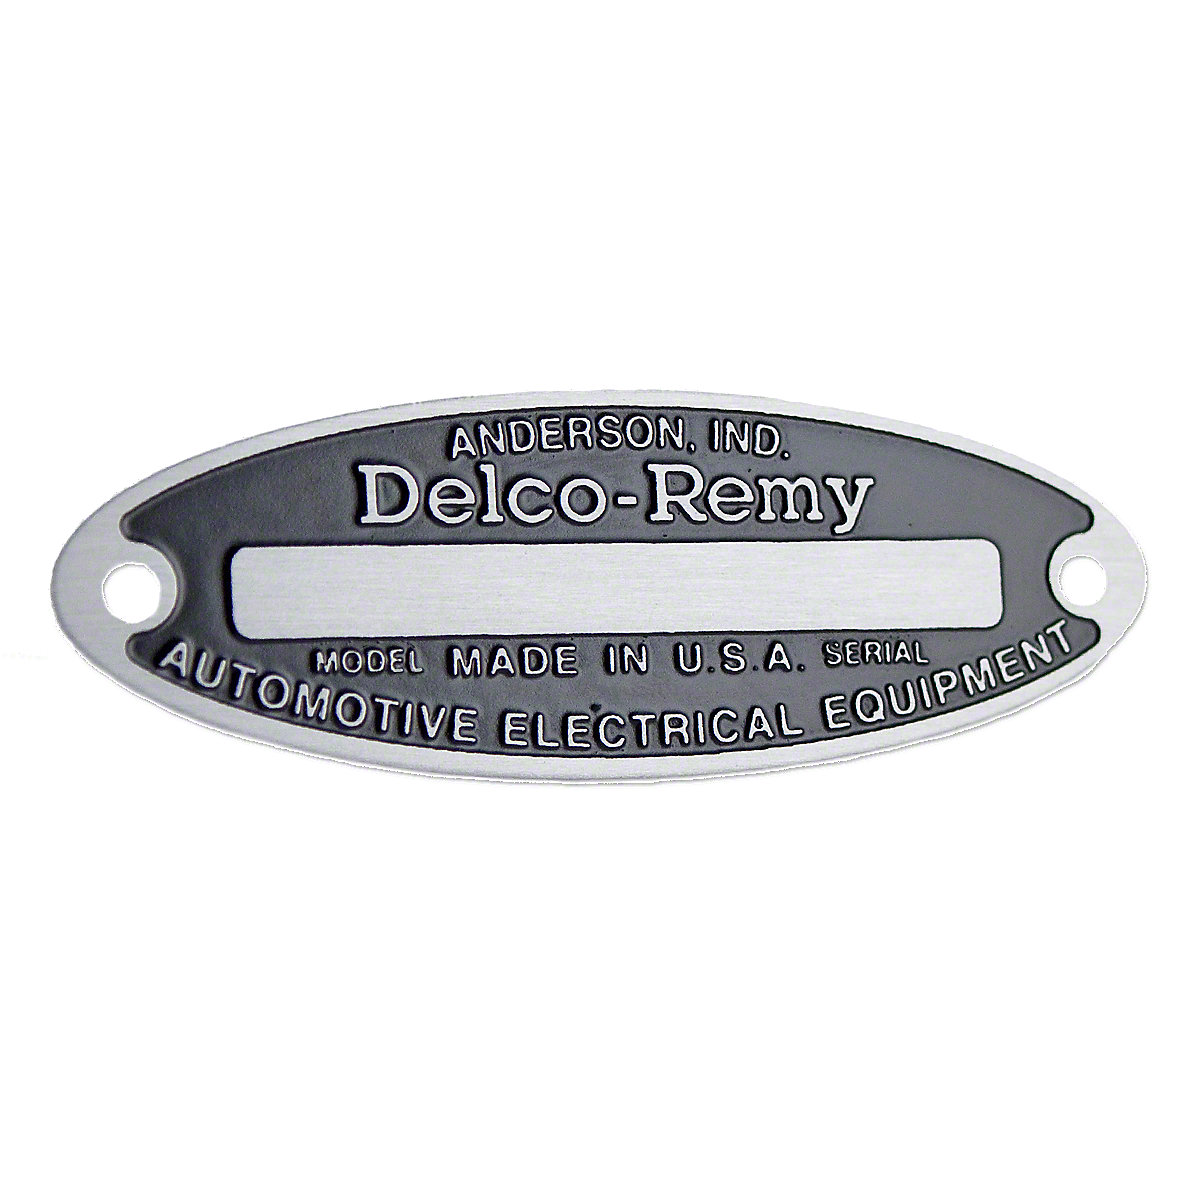 Delco Remy Blank Generator Tag For Massey Harris And Massey Ferguson Tractors.